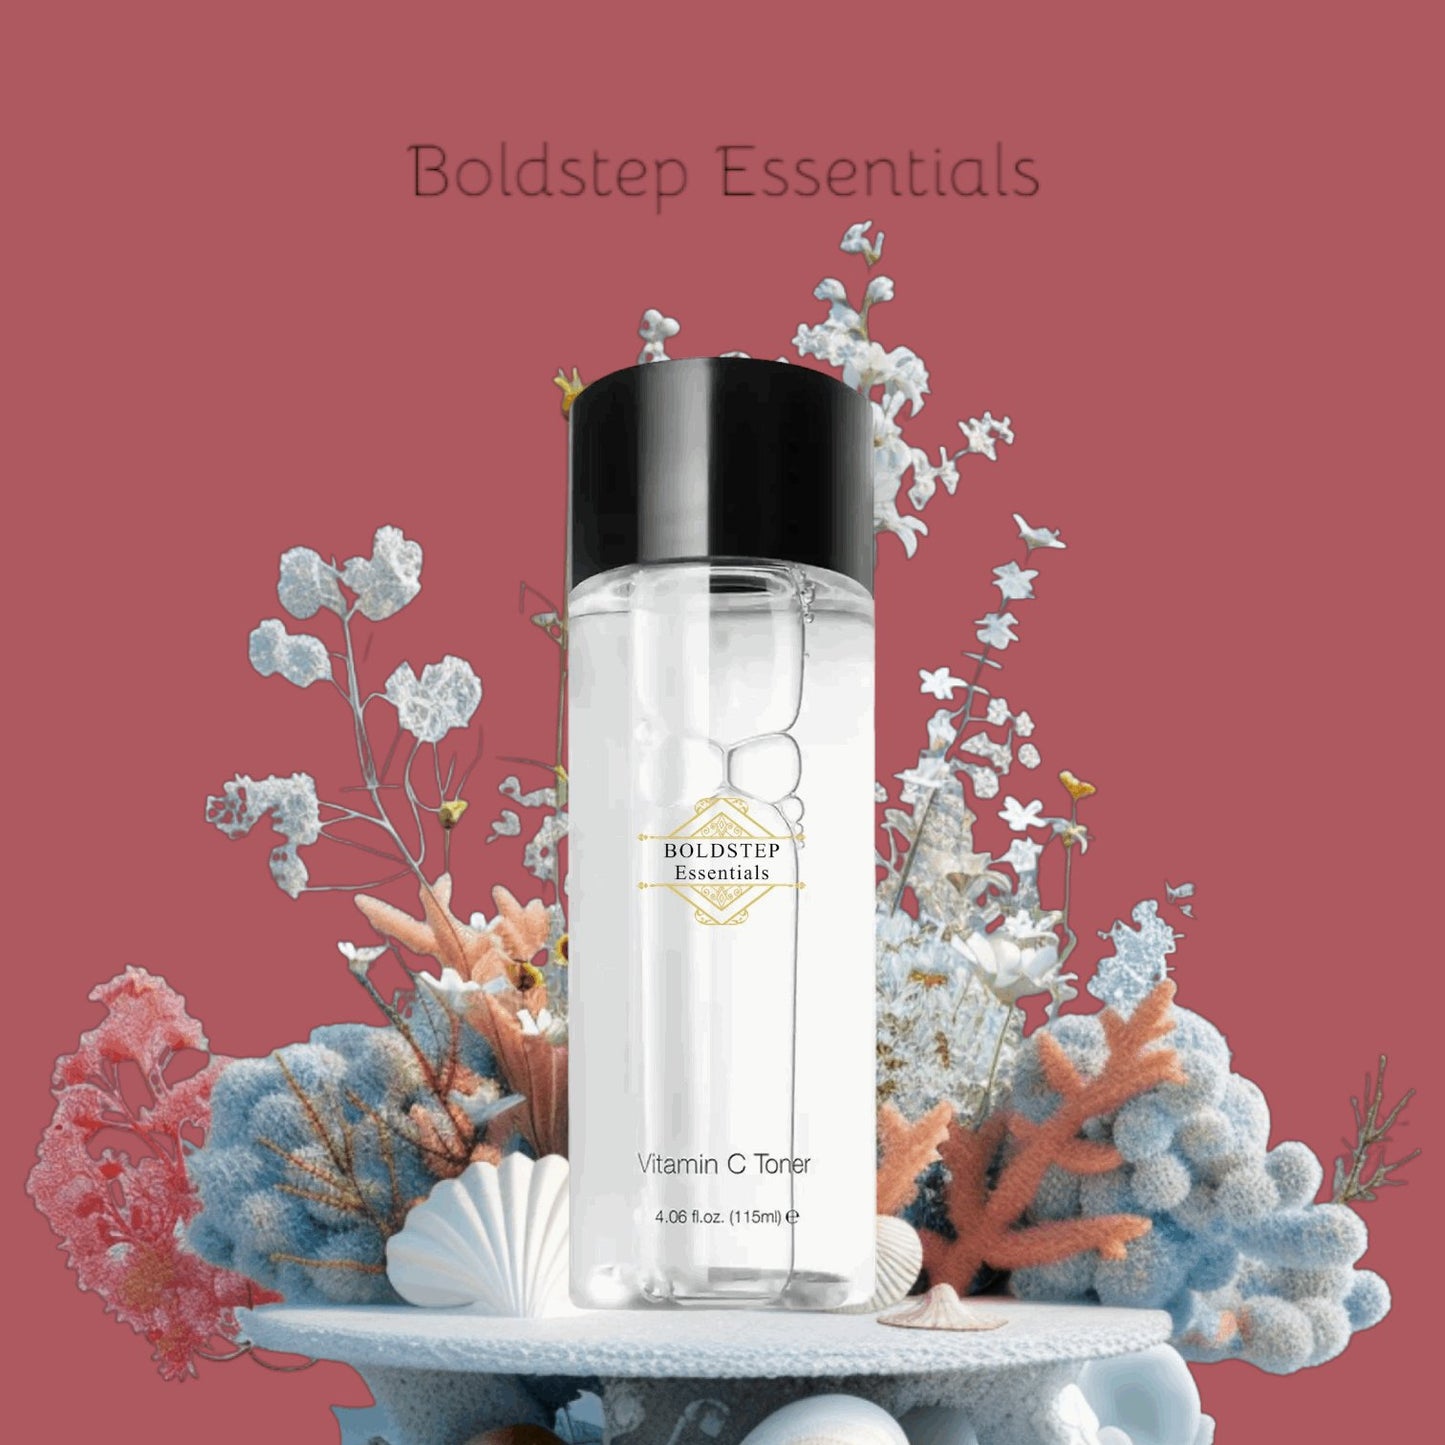 Boldstep Essentials Skin Toner: Toner for Even Skin Tone. Contains Vitamin C, Green tea extract, and Japanese knotweed, Picture 4